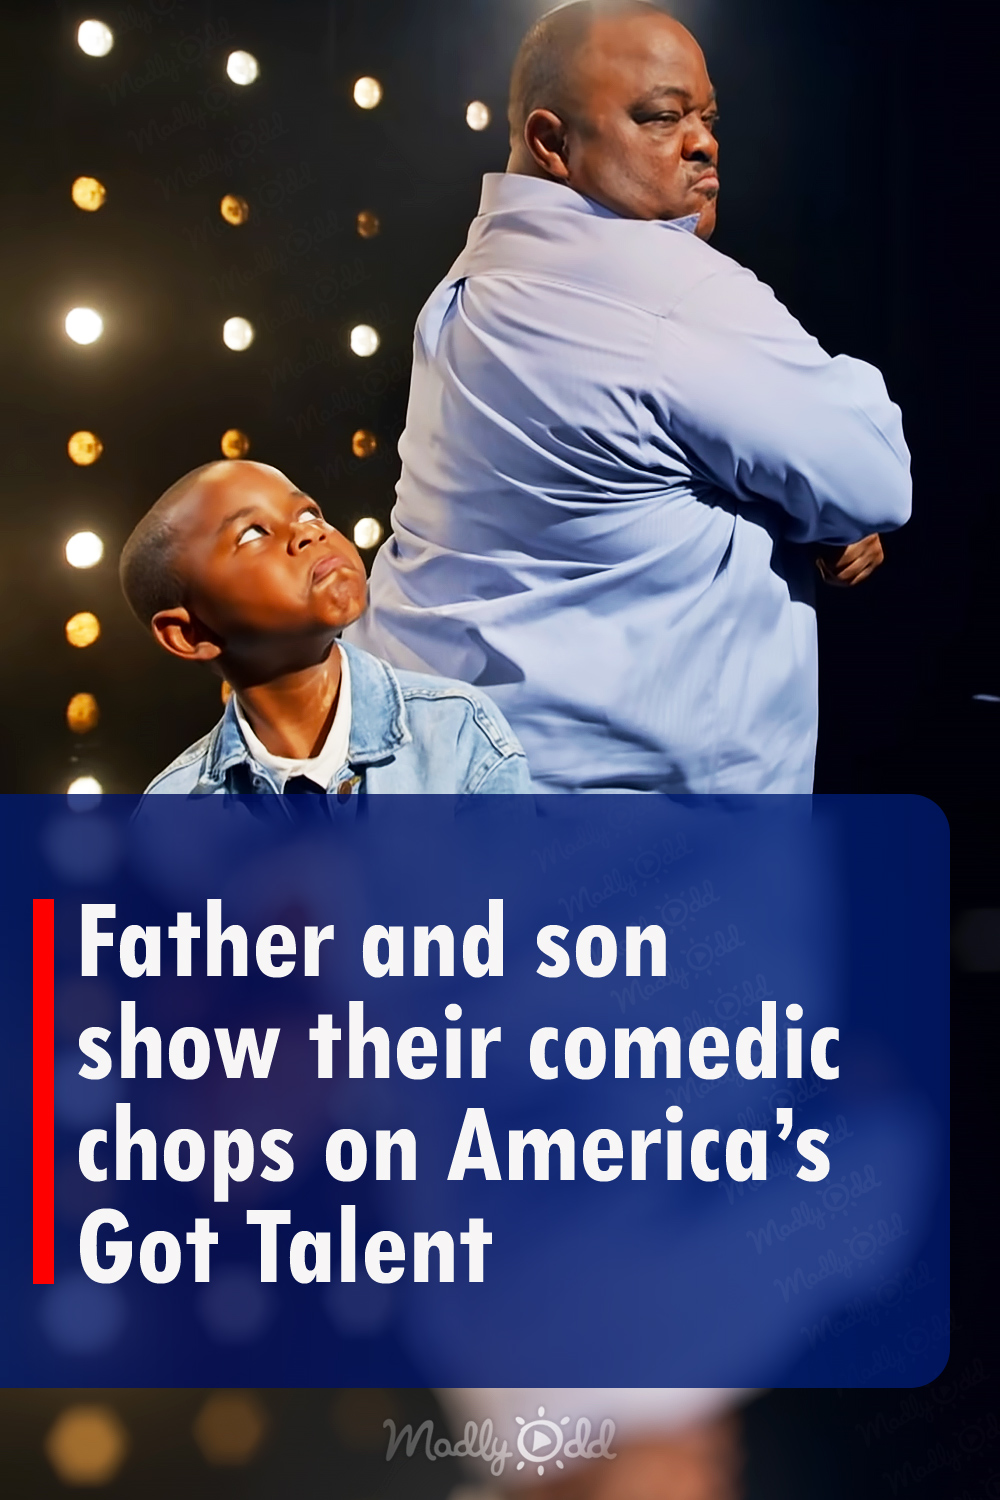 Father and son show their comedic chops on America’s Got Talent